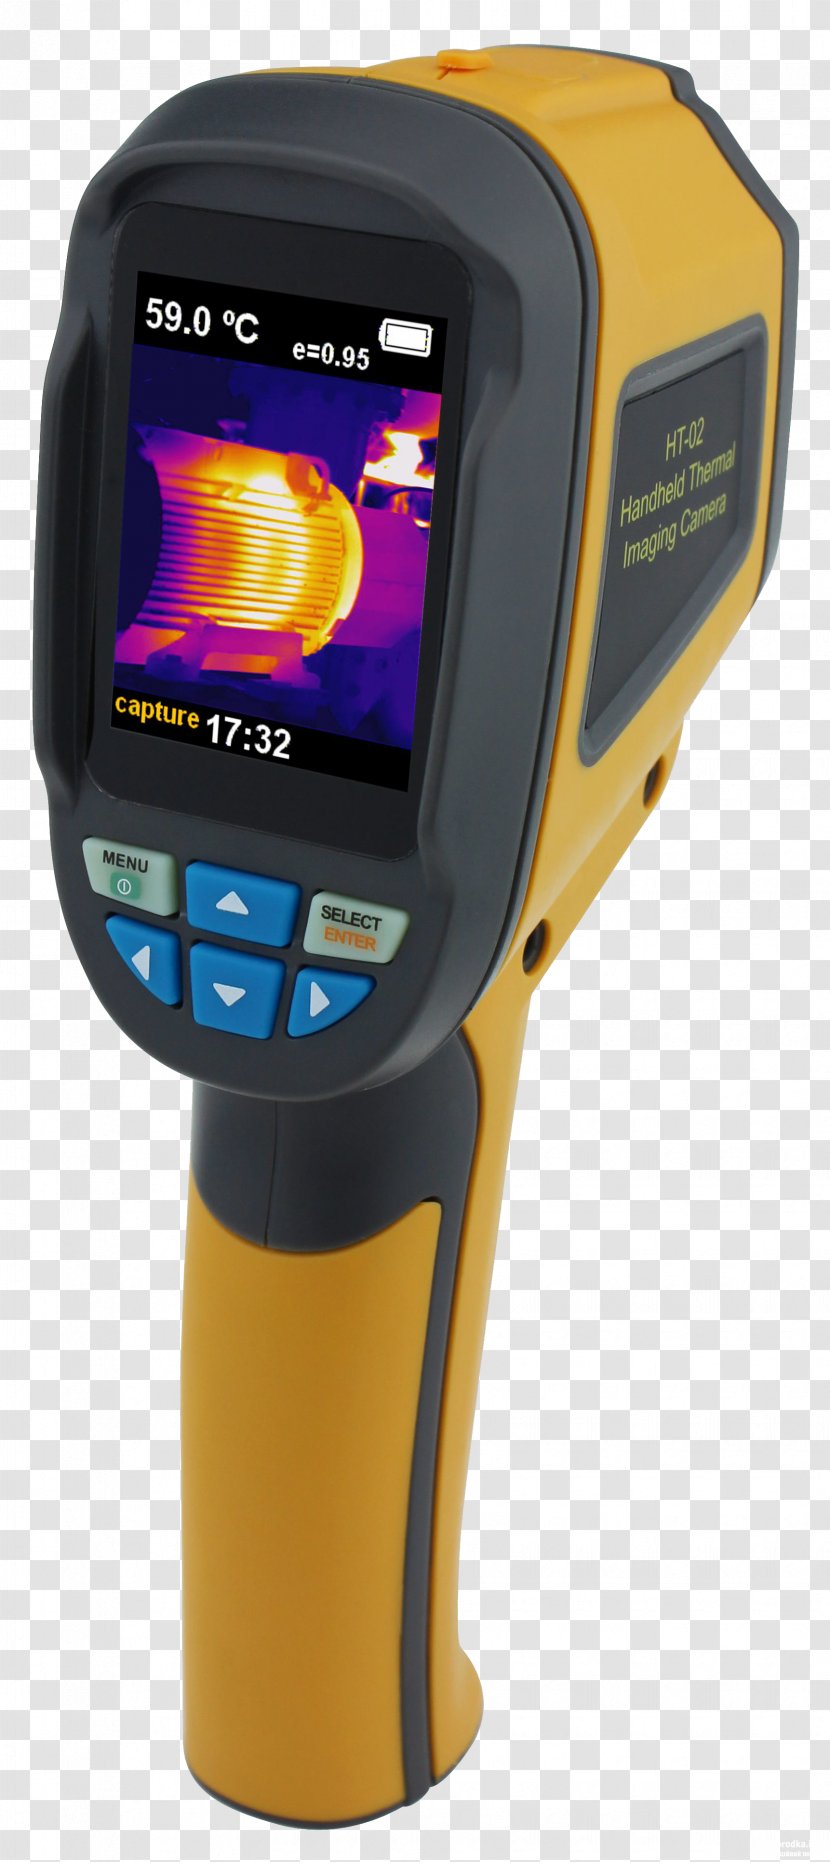 Thermographic Camera Infrared Thermal Imaging Cameras Thermography Transparent PNG